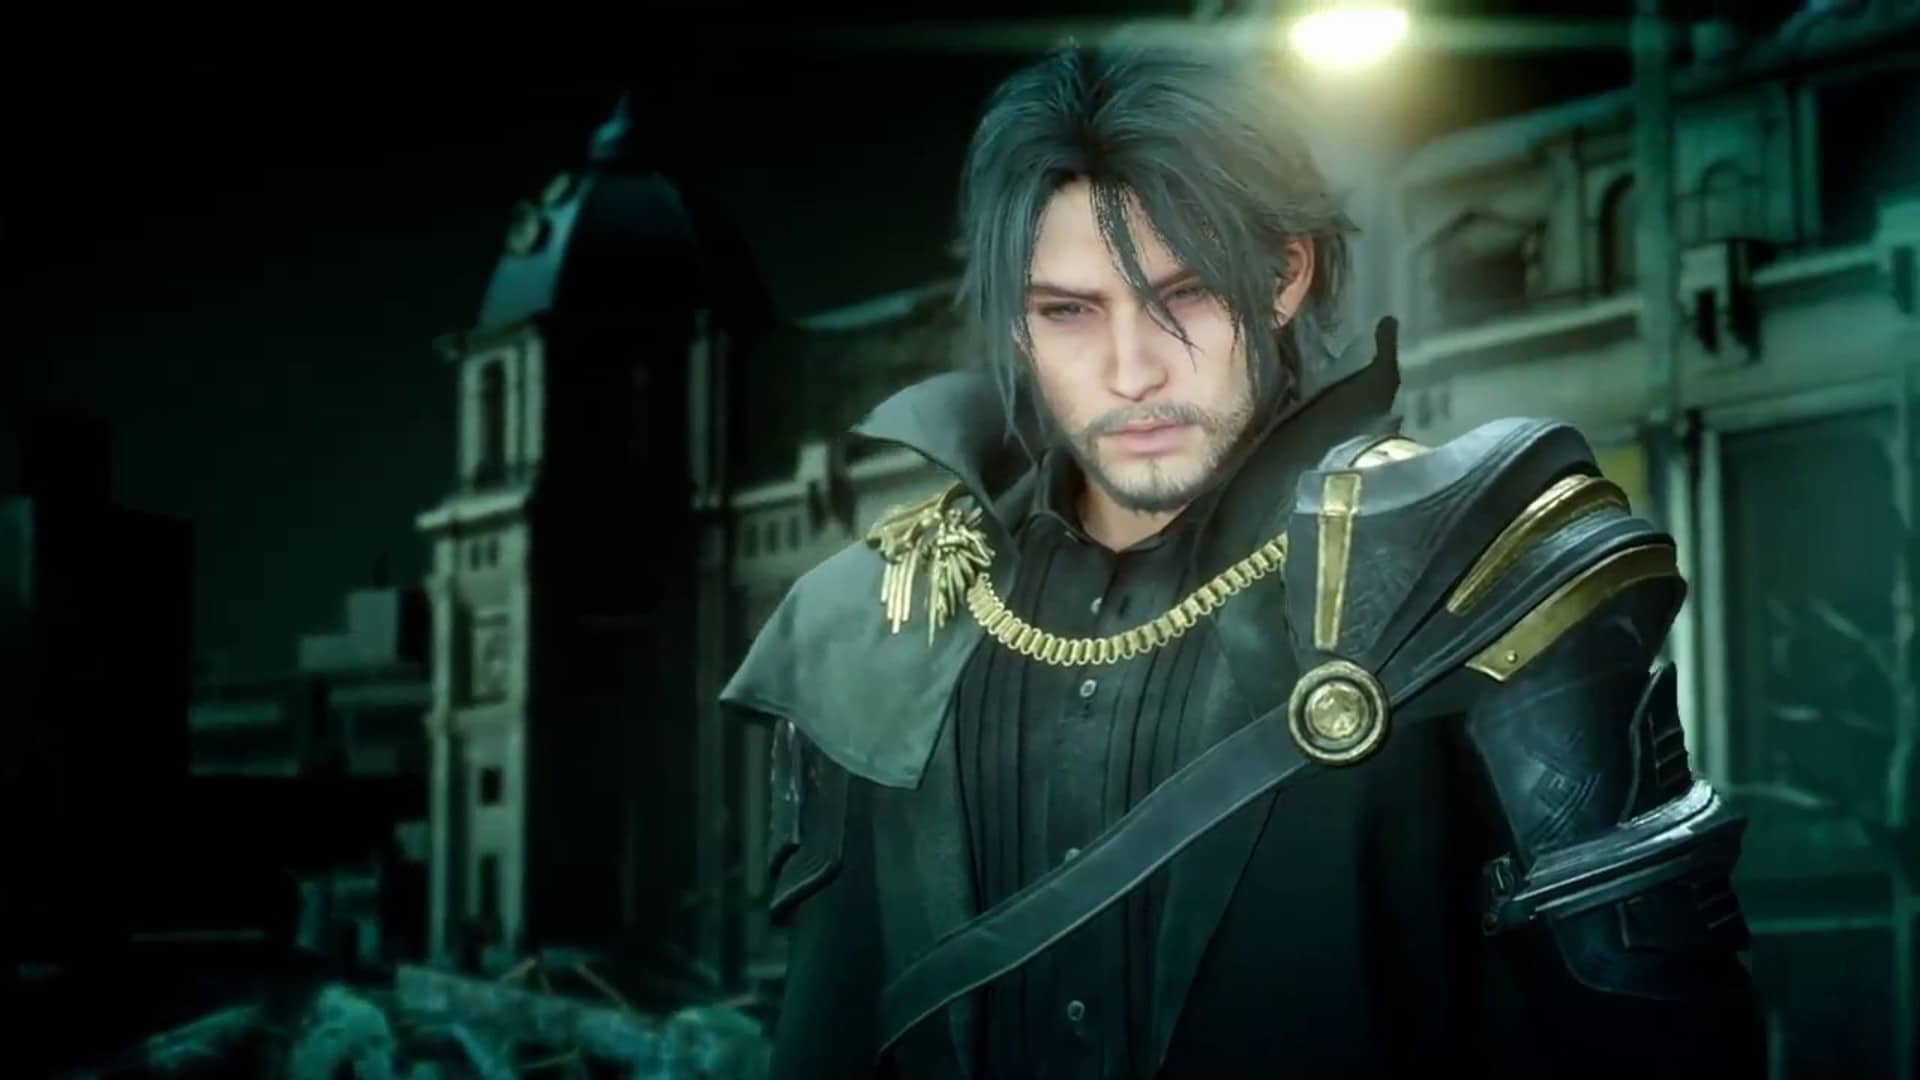 Final Fantasy XV: Royal Edition is the definitive edition of the